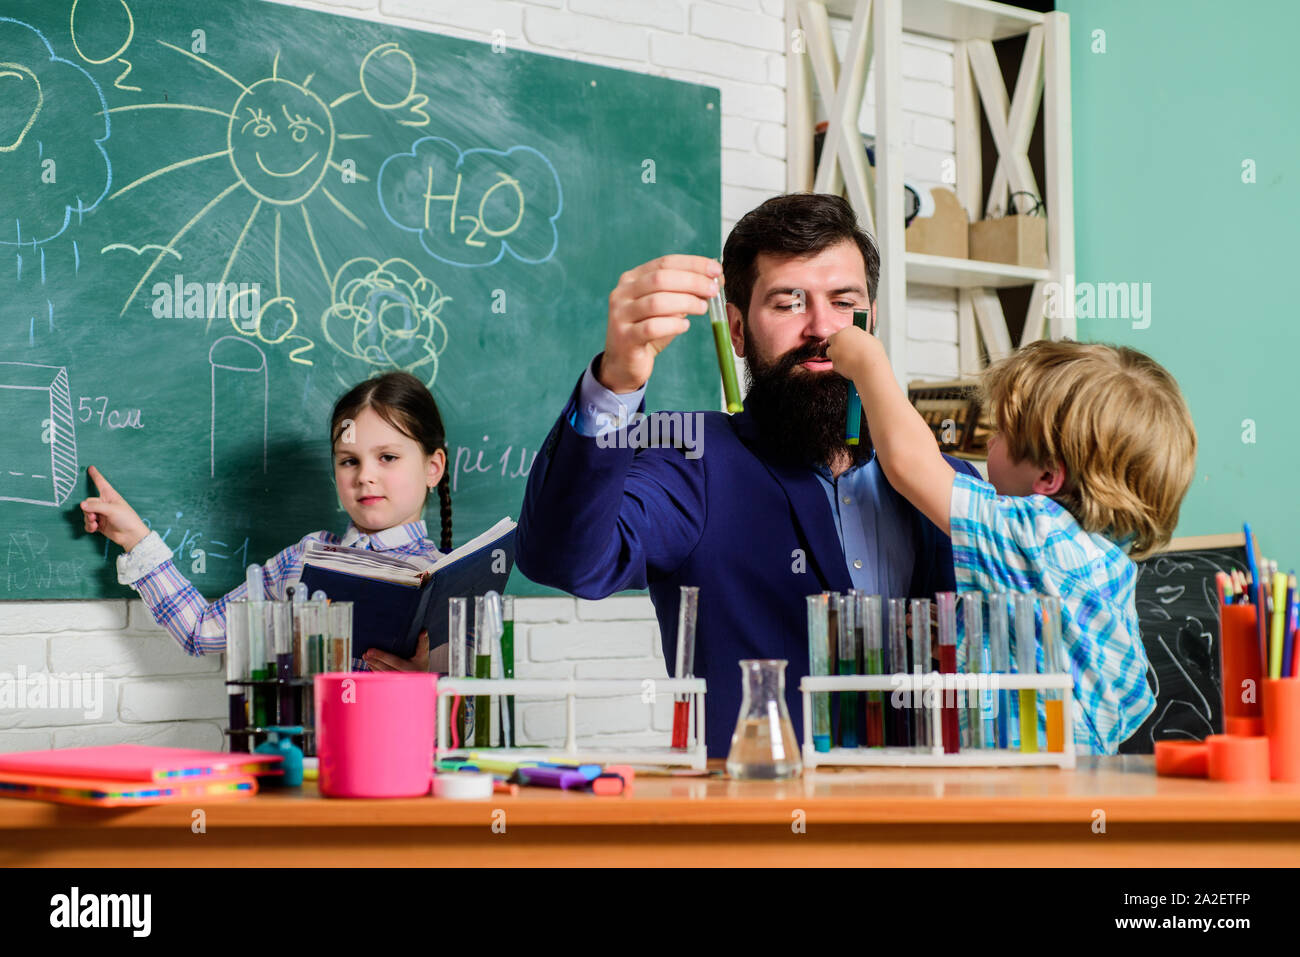 School clubs interactive education. Clubs for preschoolers. After school clubs are great way to develop kids in different areas. Chemistry experiment. Teacher and pupils test tubes in classroom. Stock Photo